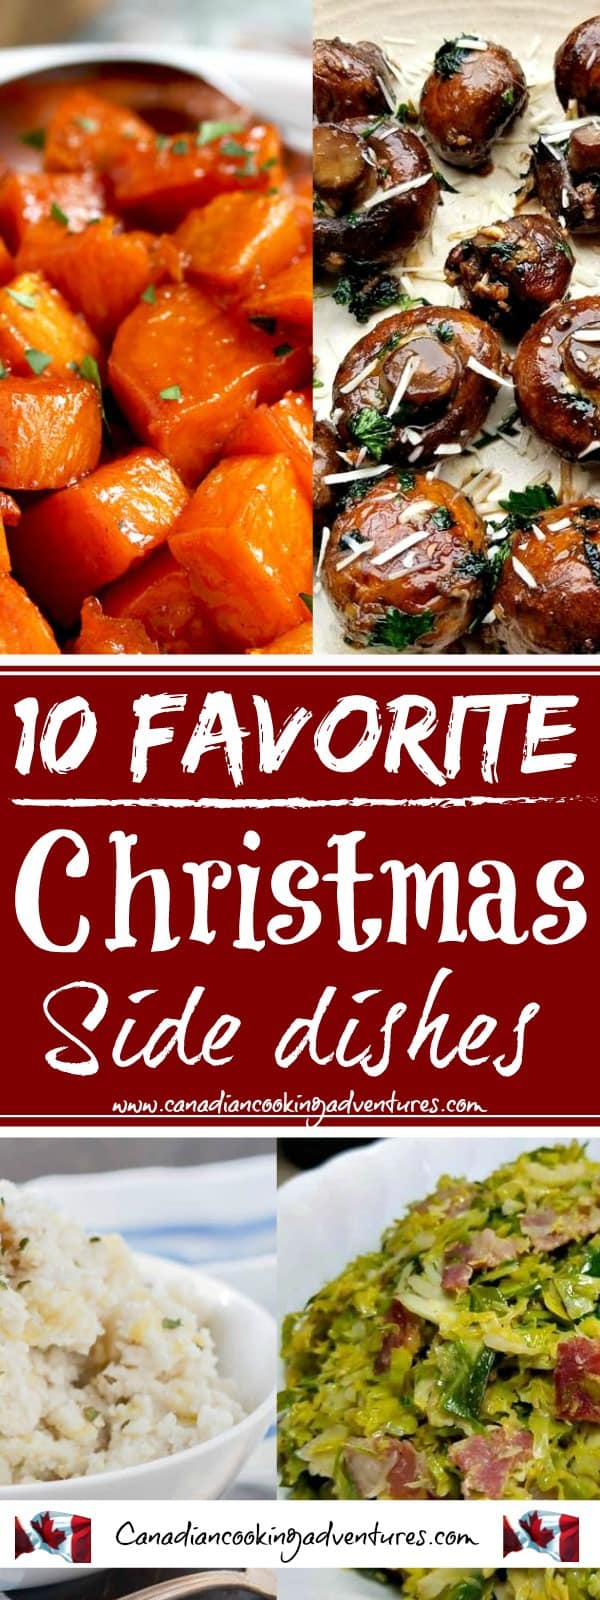 10 Favorite Christmas Side dishes